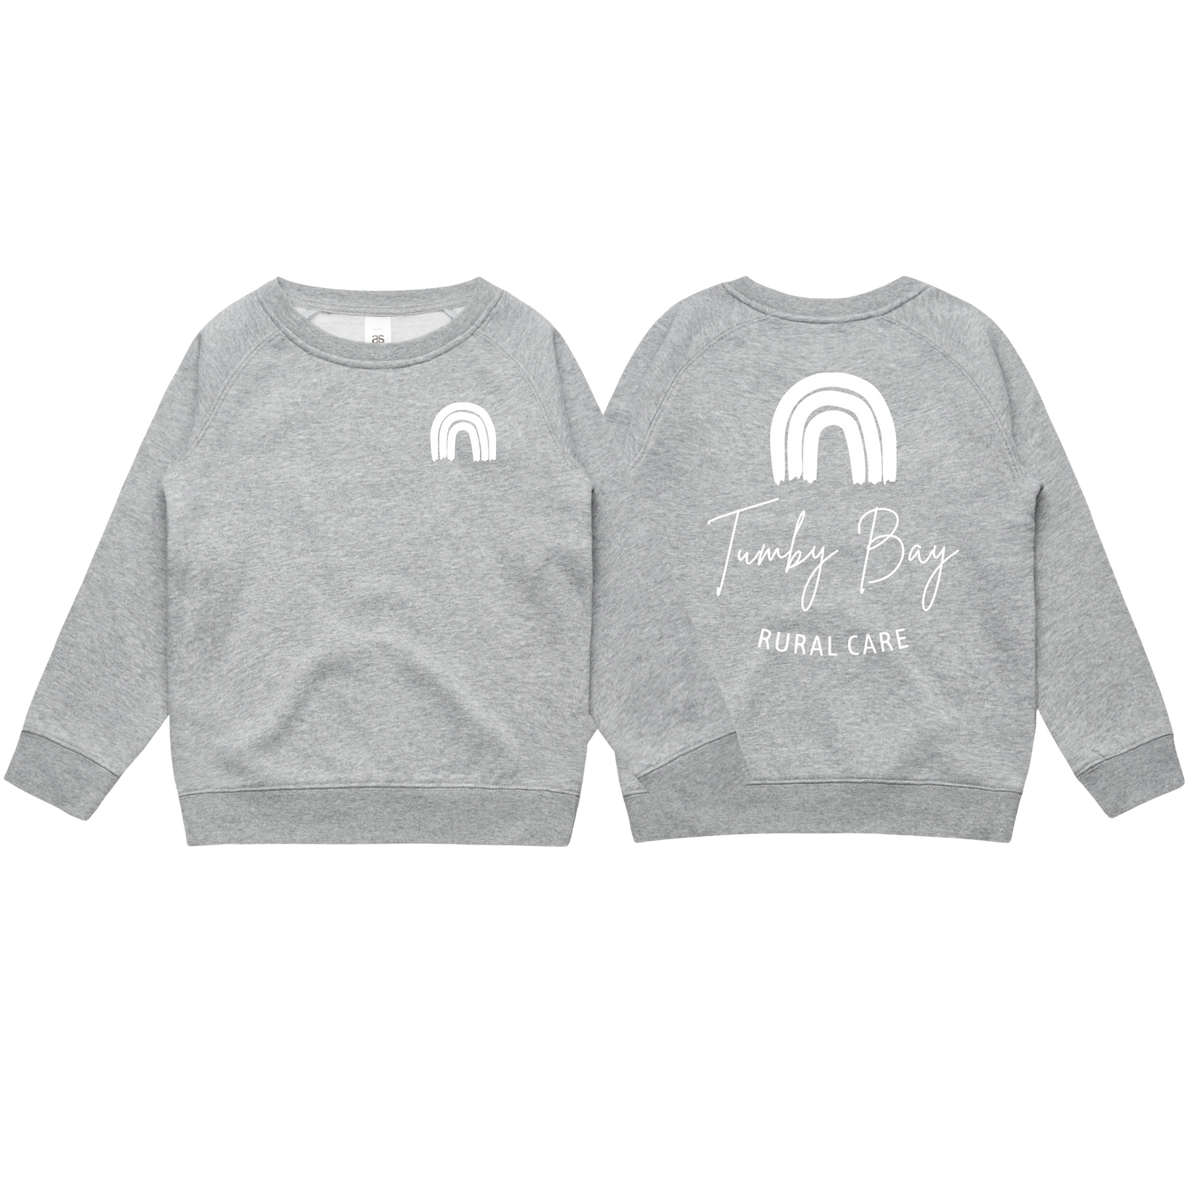 Tumby Bay Rural Care Crew Neck Grey Jumper Logo Print Front and Back 3030